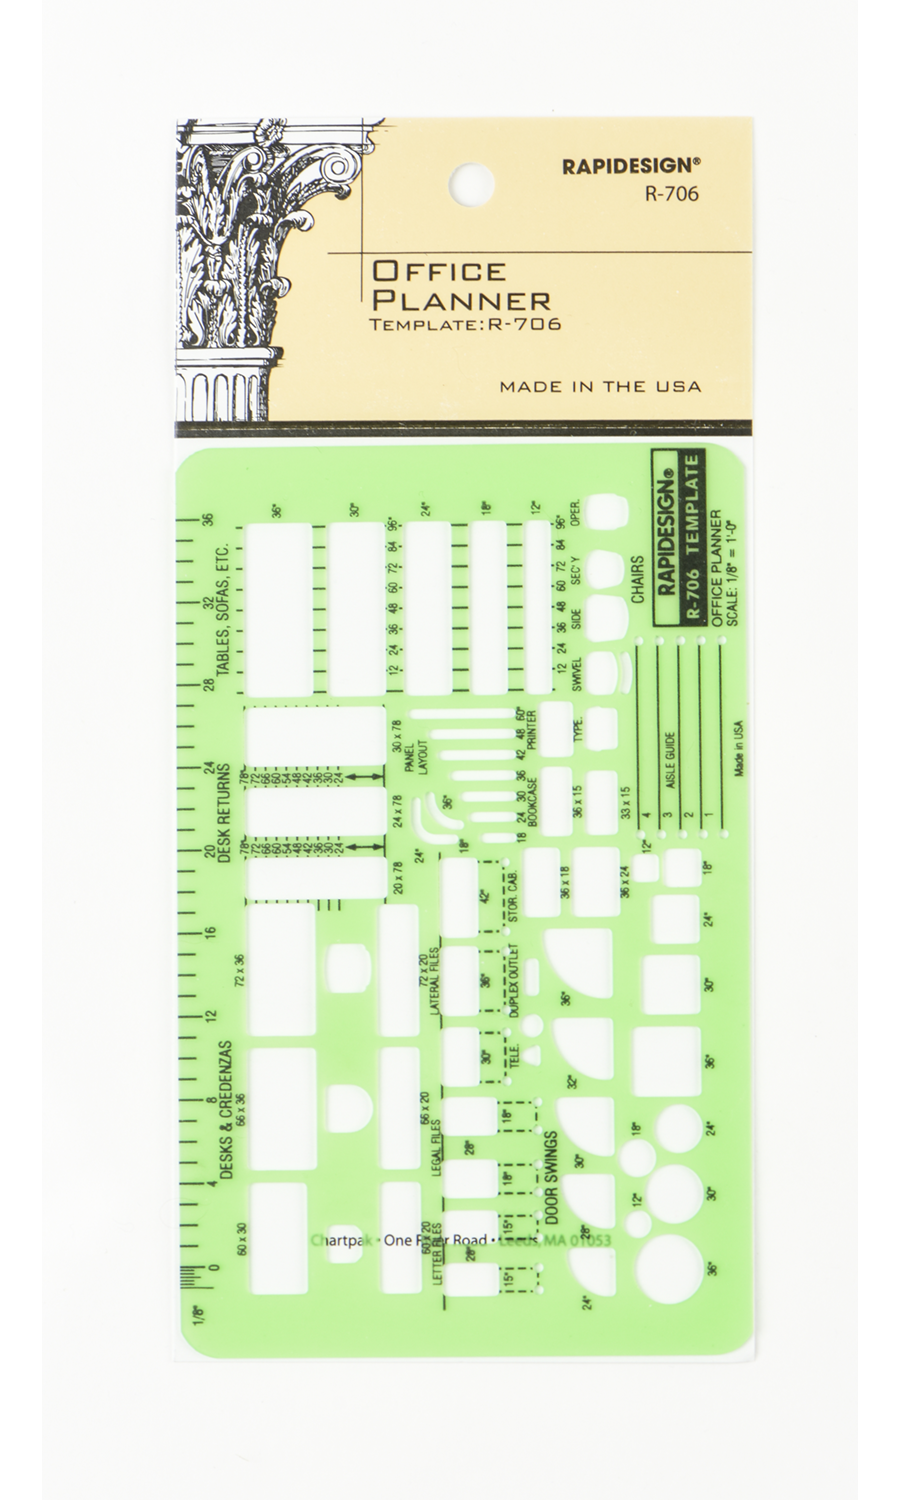 Office Planner Template, 1/8" Scale